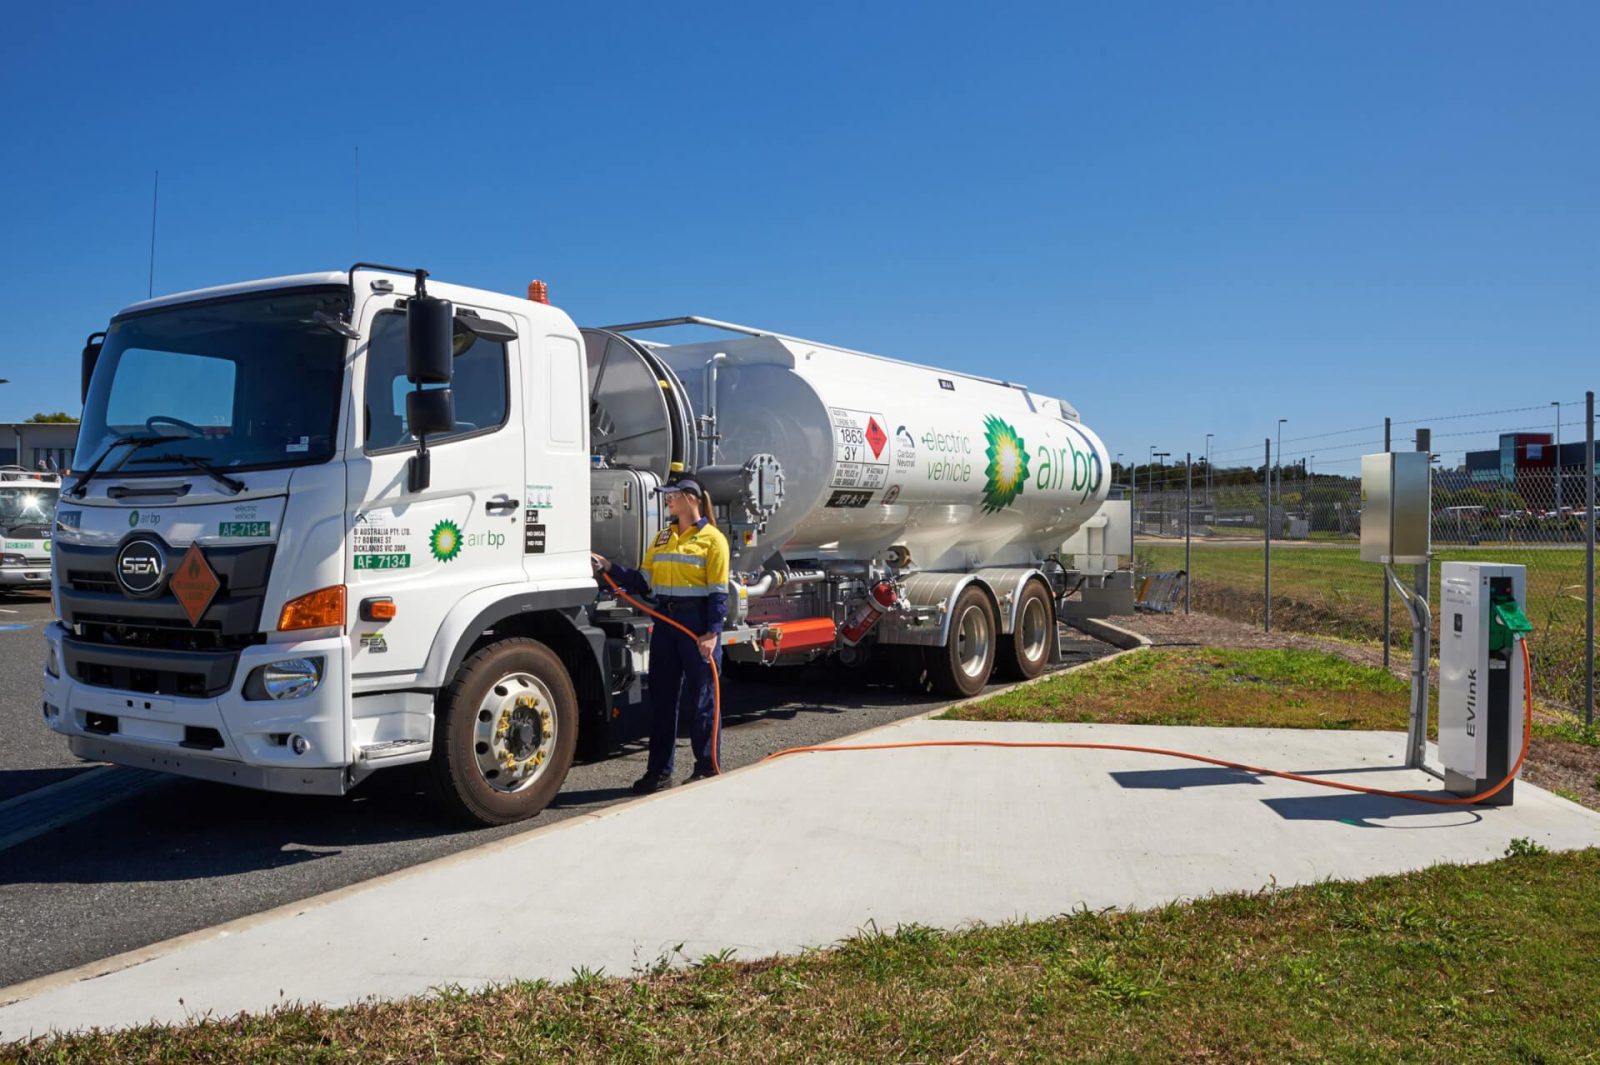 Air bp Unveils Custom-designed All-electric Refuelling Vehicle at Brisbane Airport